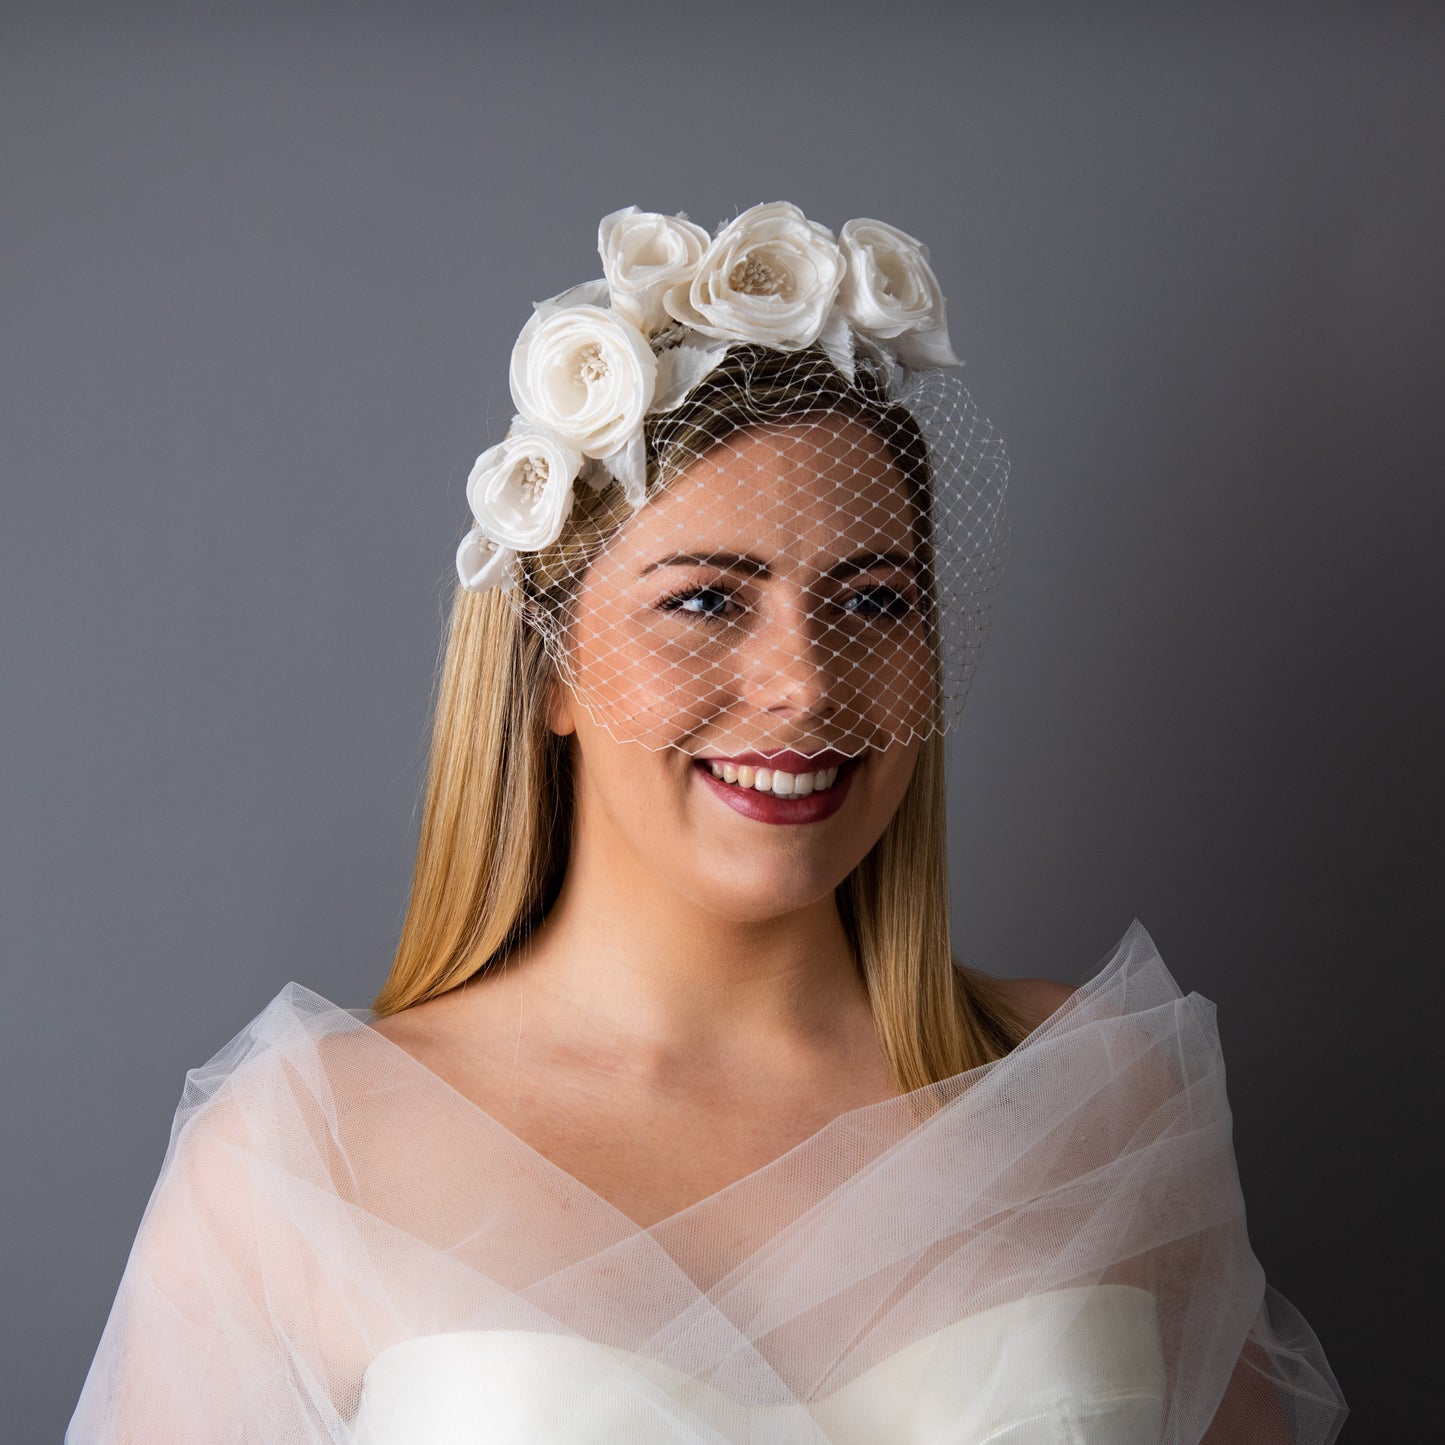 Happily Ever After Bridal birdcage veil with silk flowers on headband